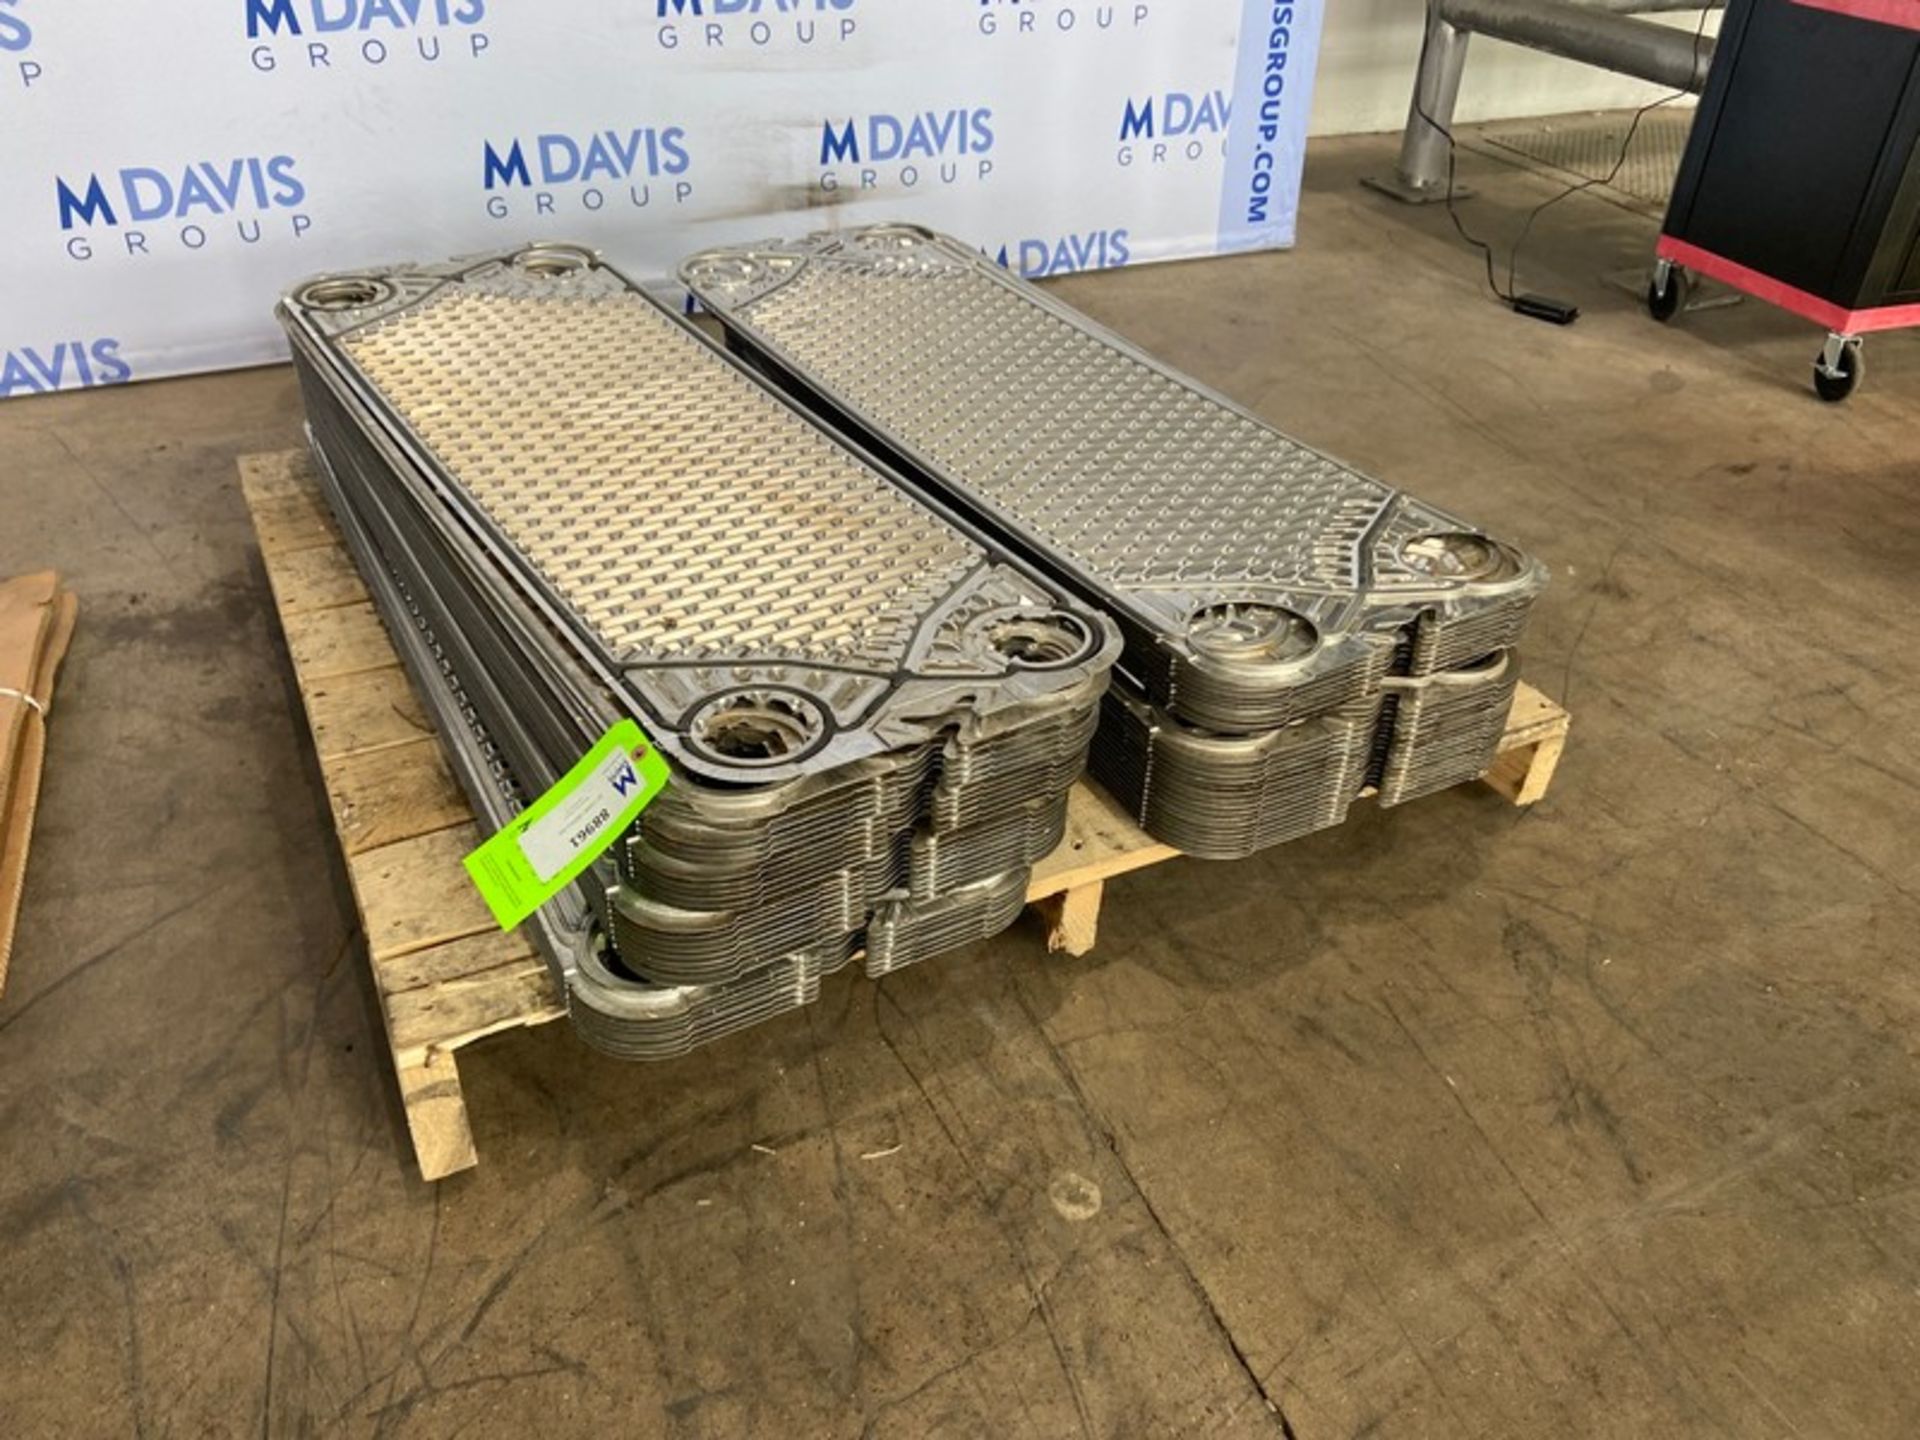 (50) Plate Press Heat Exchanger S/S Plates, , Overall Dims.: Aprox. 47-1/2" L x 15" W, Includes (